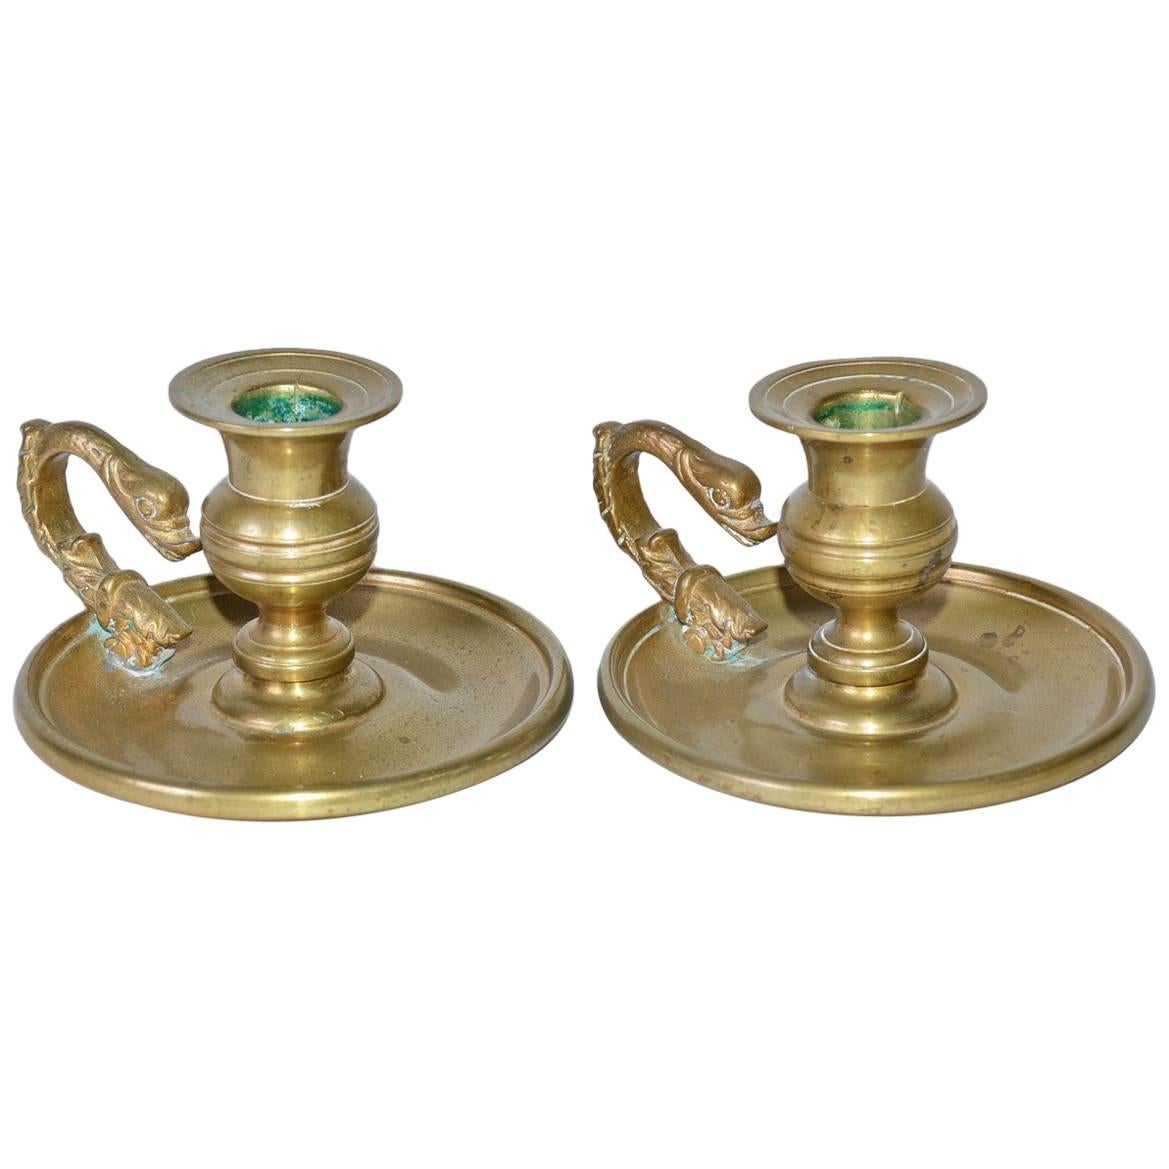 Pair of Antique Brass Candleholders with Dolphin Handles